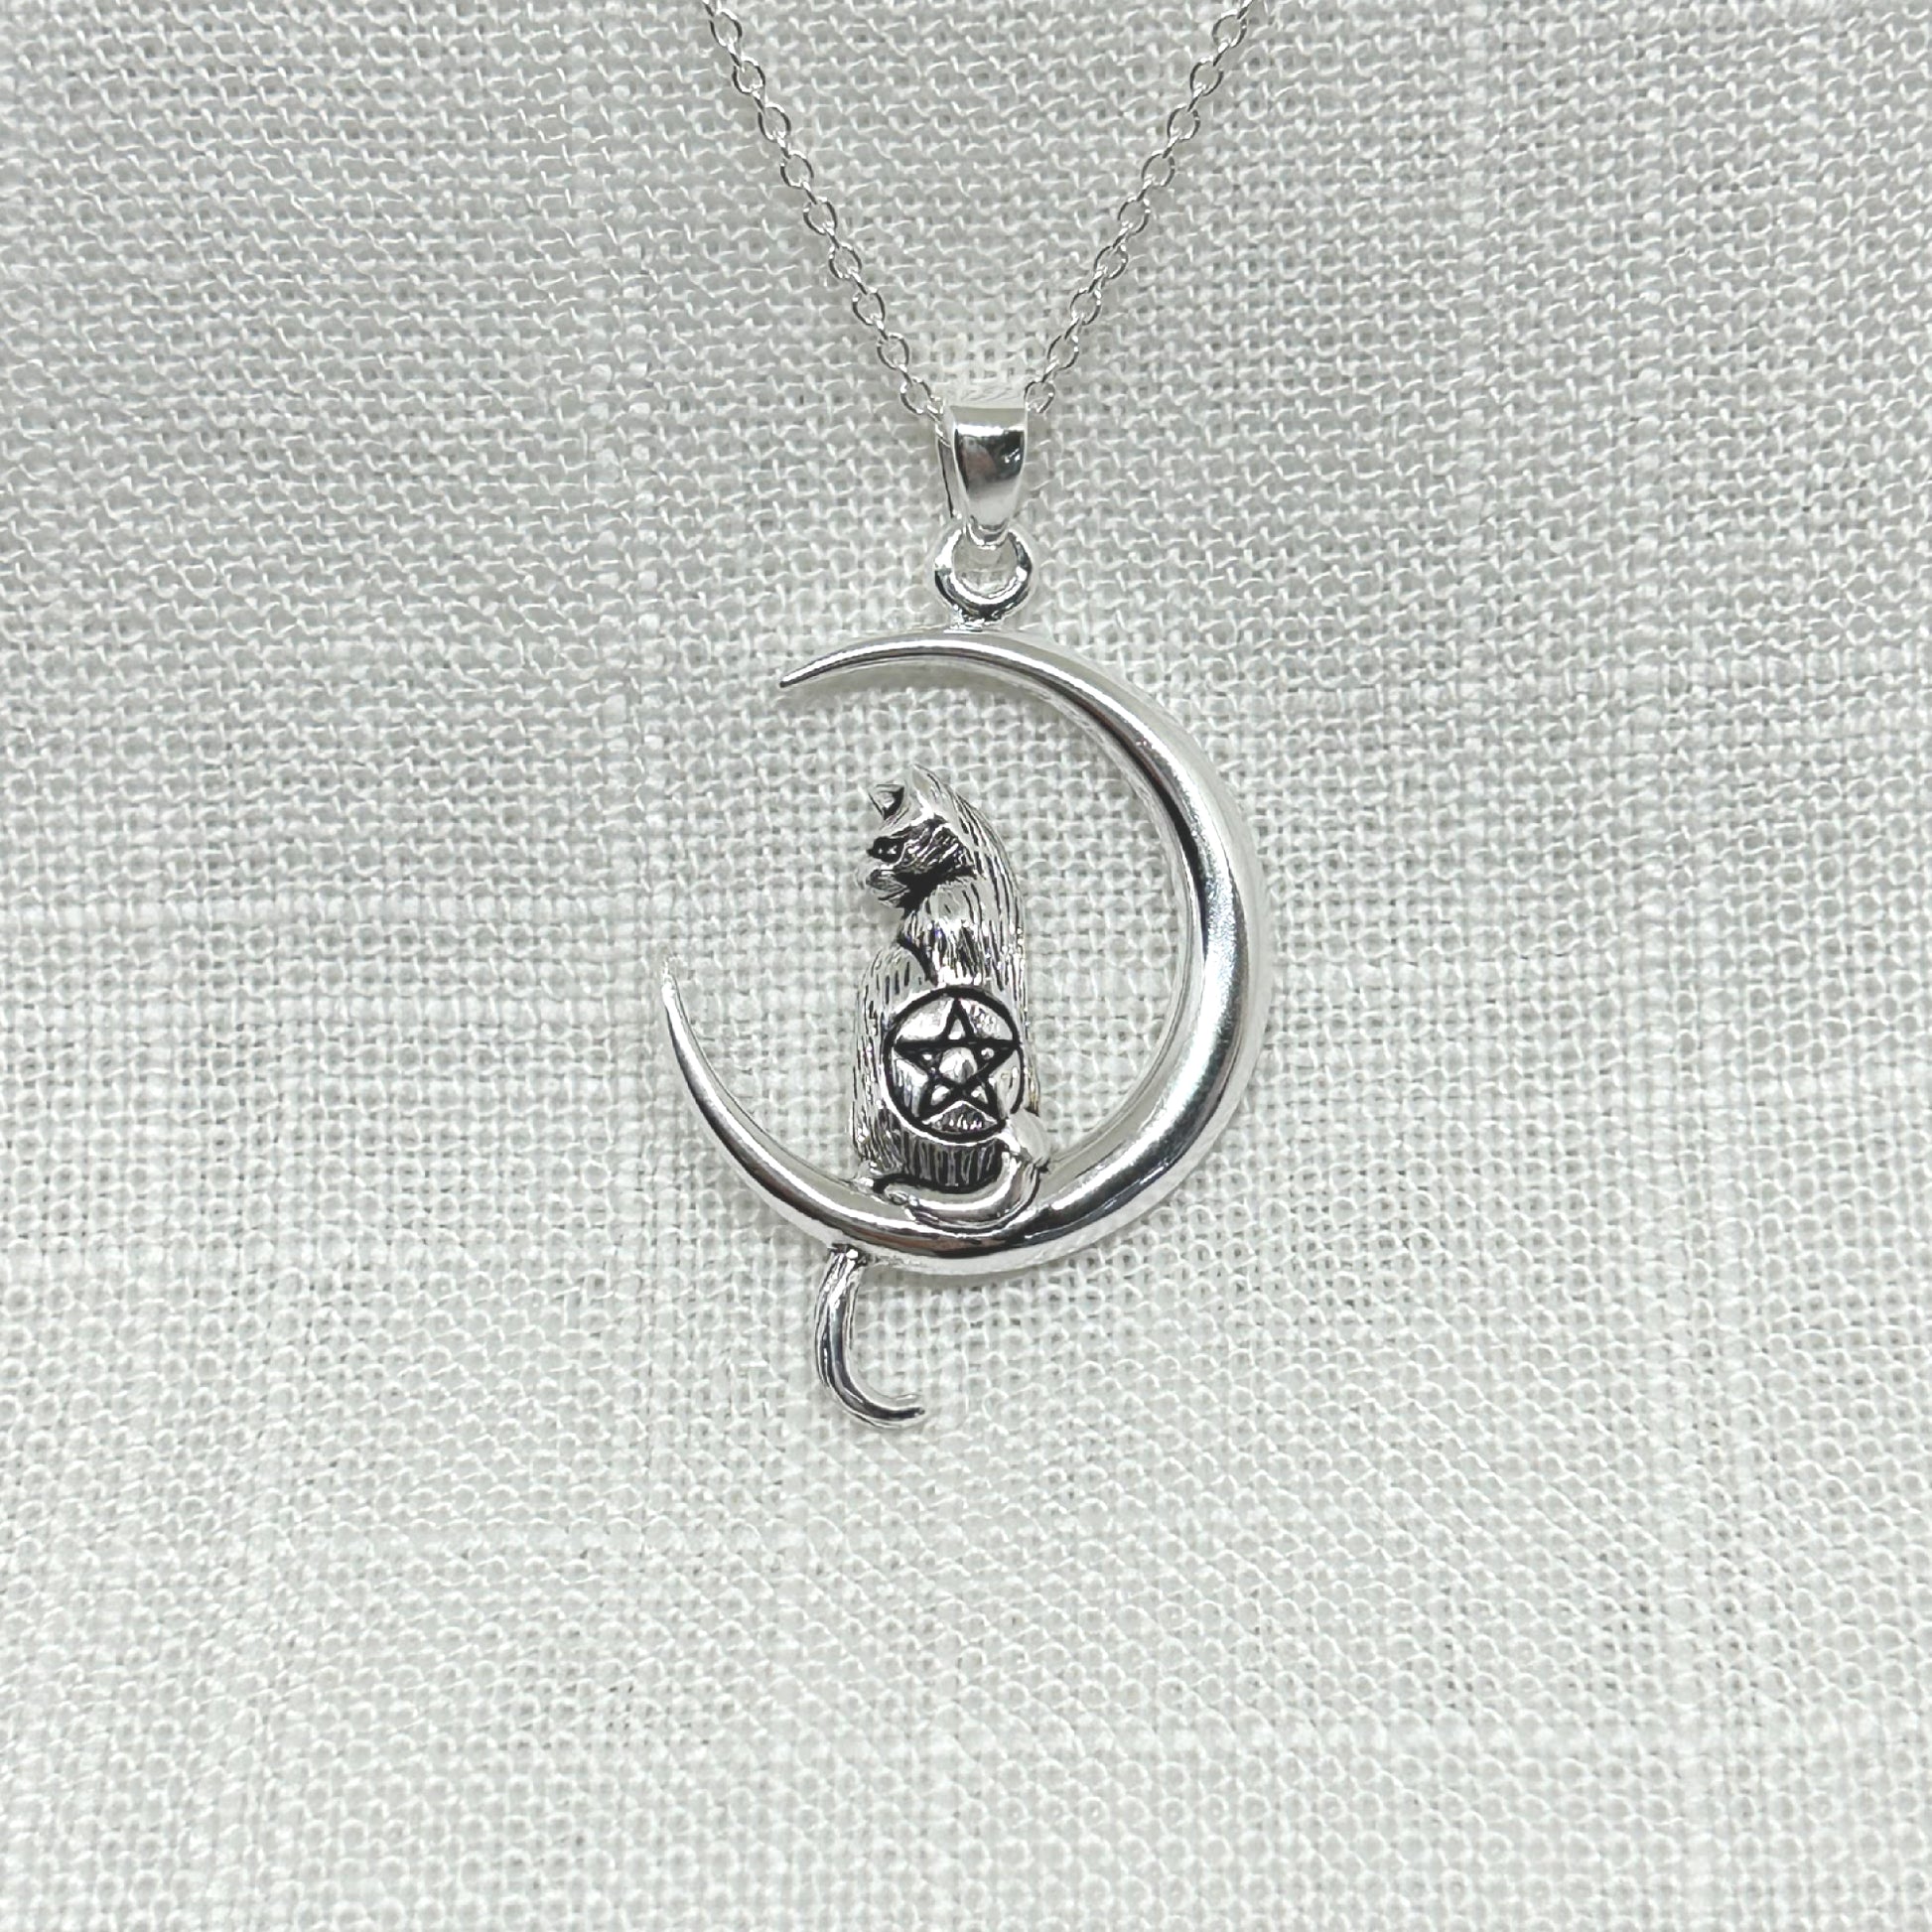 Sitting on a crescent moon is a beautiful 3D Witches' cat, with its head turned to the side and tail hanging below. On the back of the cat is a pentacle symbol. The cat has been slightly oxidised to show off the fur, eyes and ears and pentacle symbol. The pendant is 4cm long including the bale x 2.5cm at its widest.